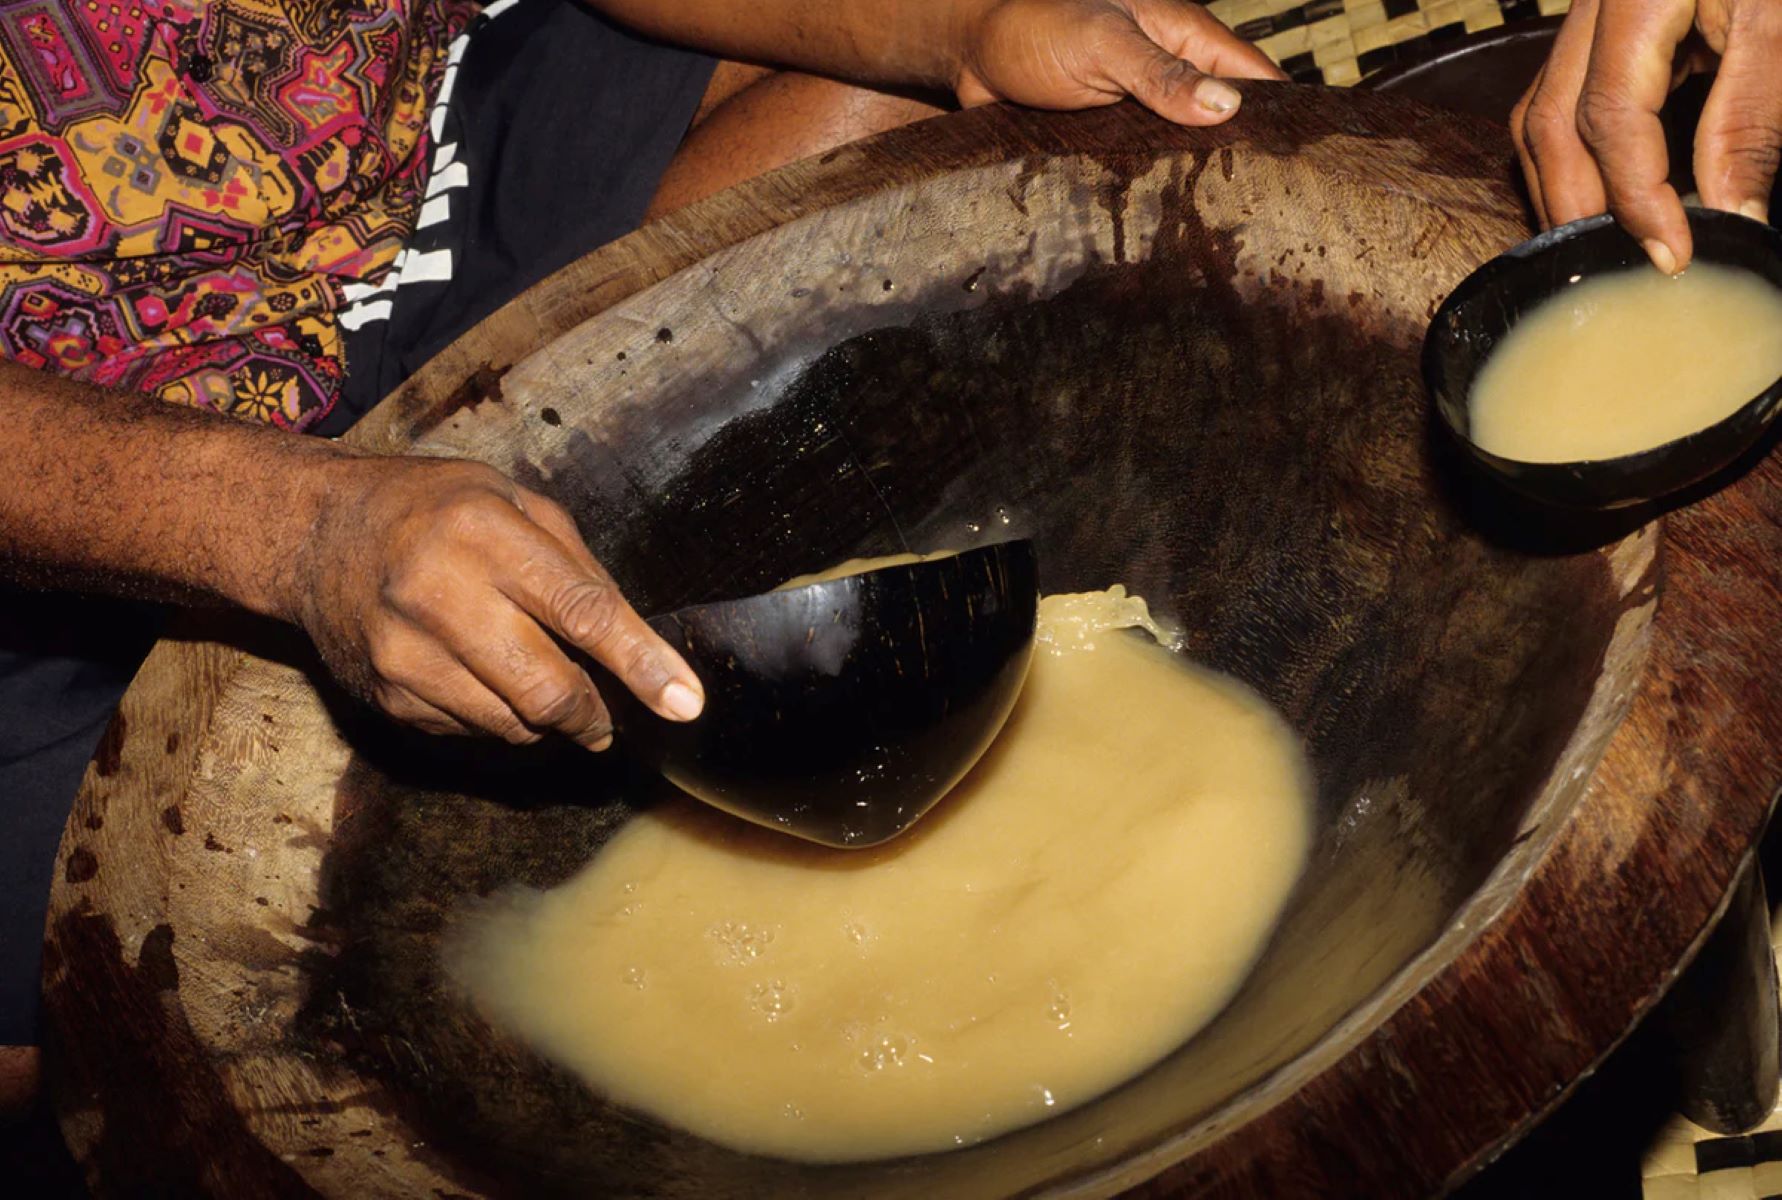 How To Make Kava Tea Without Strainer